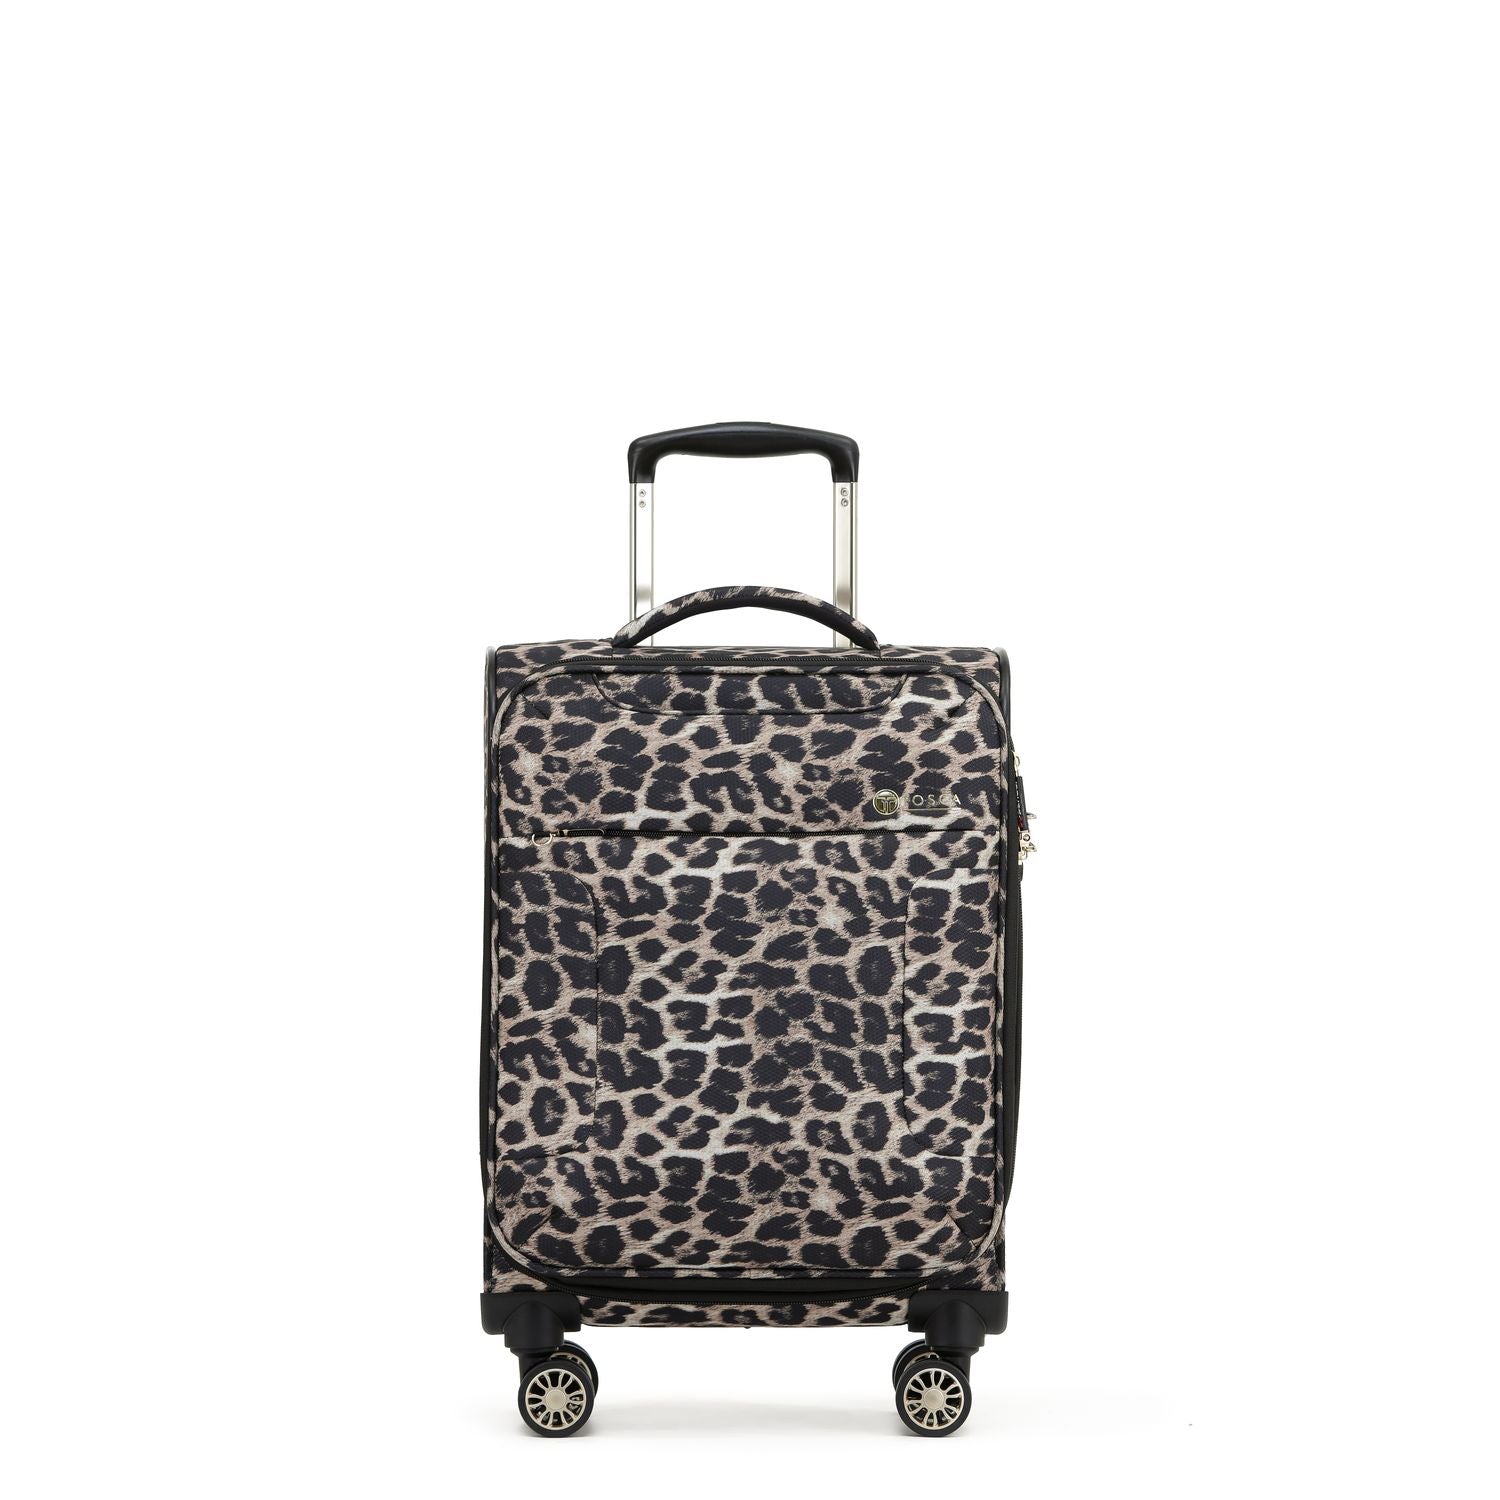 Tosca - So Lite 3.0 20in Small 4 Wheel Soft Suitcase - Leopard-1